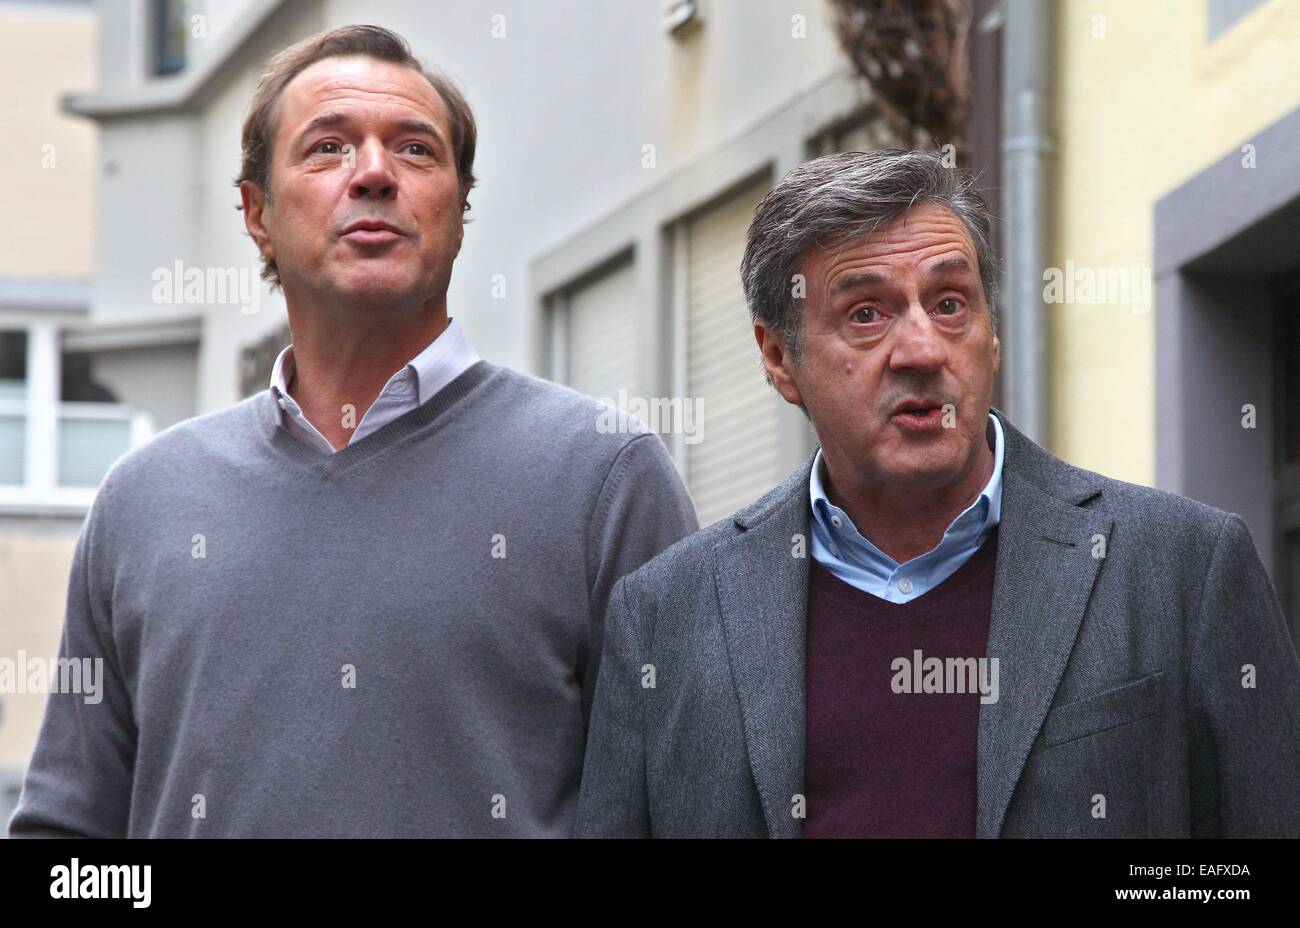 French actor Daniel Auteuil (R) and German actor Sebastian Koch pose on the set of the film 'Bamberski-Der Fall Kalinka' (lit. the Kalinka case) in Lindau, Germany, 14 November 2014. The French and German justice system have been dealing with the Kalinka case since three decades. The film focusses on the death of the 14-year old girl and her father's actions of vigilantism. Photo: Karl-Josef Hildenbrand/dpa Stock Photo